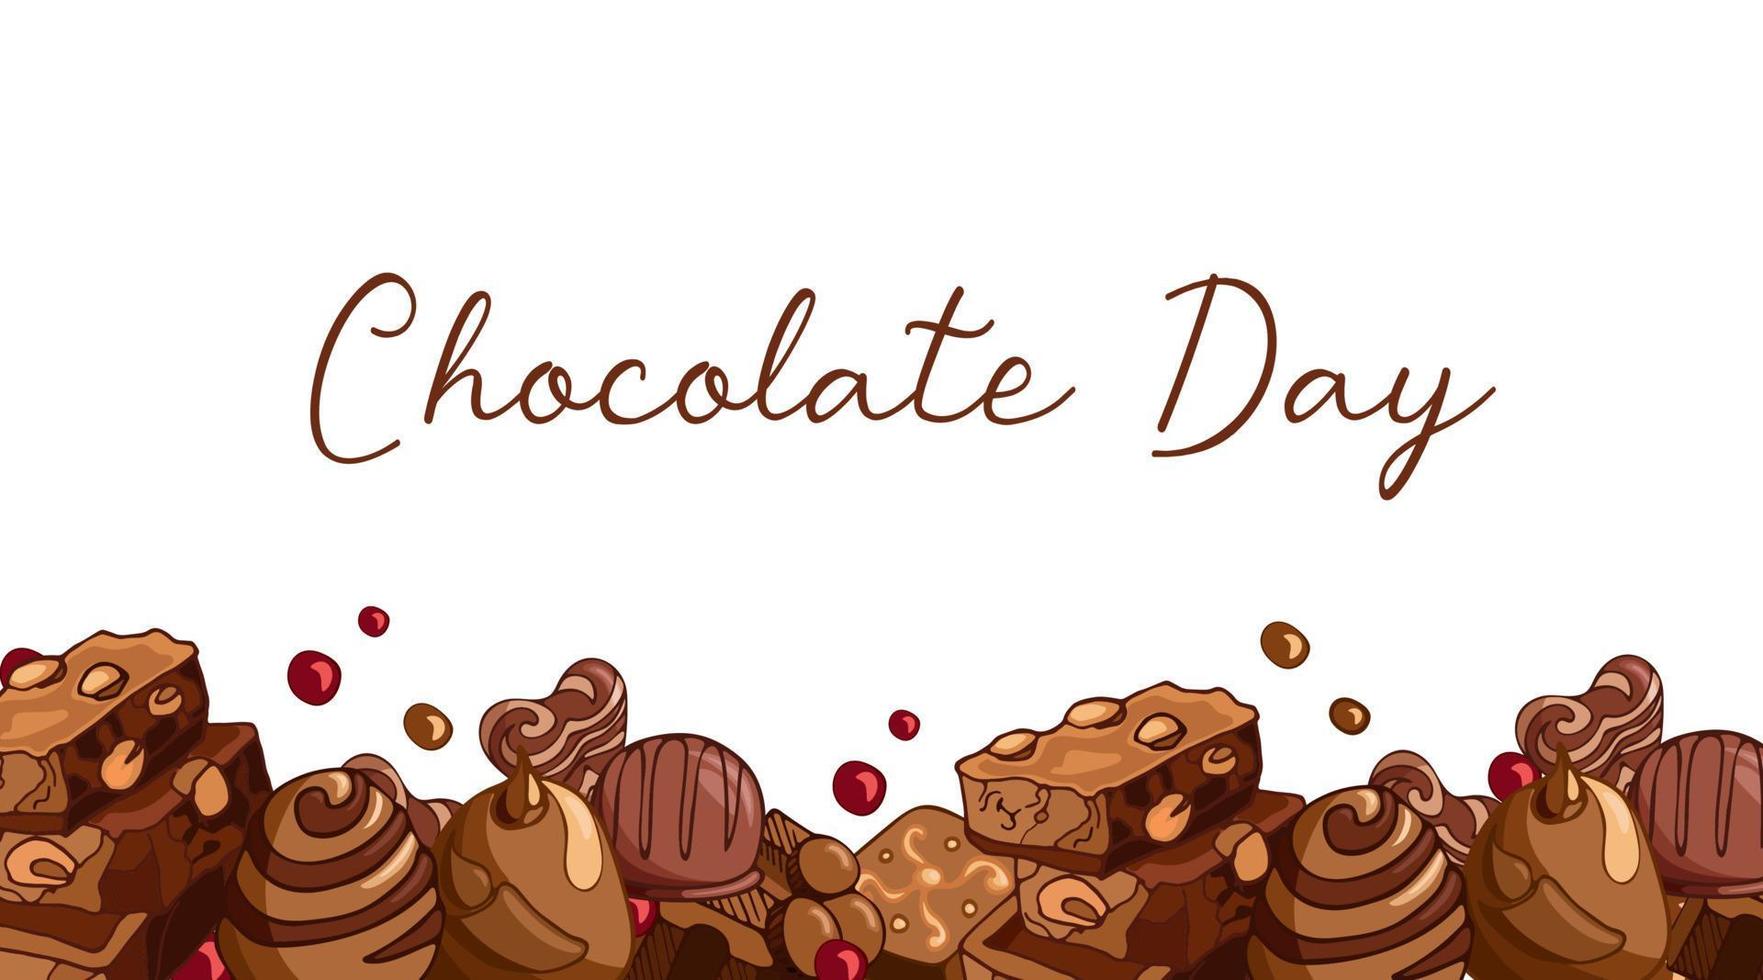 Vintage horizontal white banner border with pieces of milk chocolate, nuts, chocolates illustration. World Chocolate Day. Vector background design. Template for cards, invitations, packaging, menu.